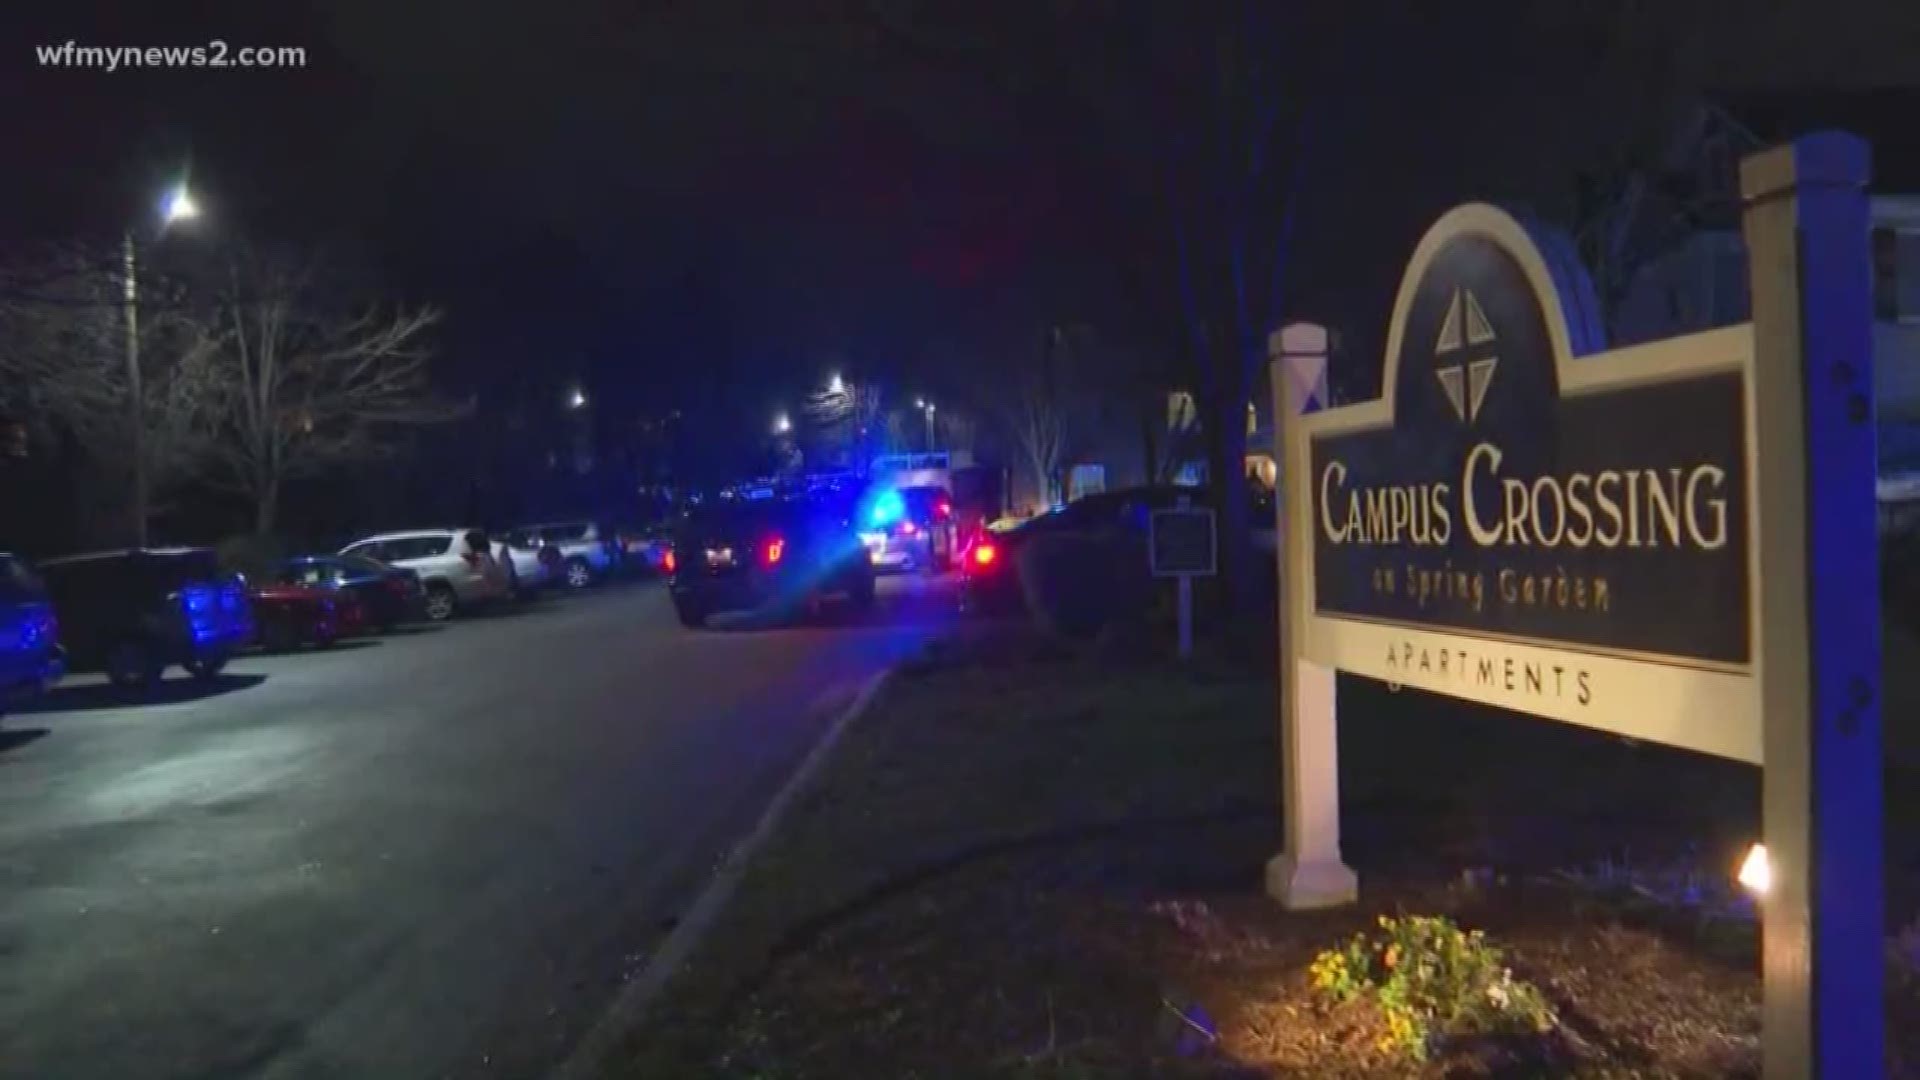 Greensboro police say one person was shot at Campus Crossing Apartments Friday night, but right now, they don’t know the extent of their injuries.